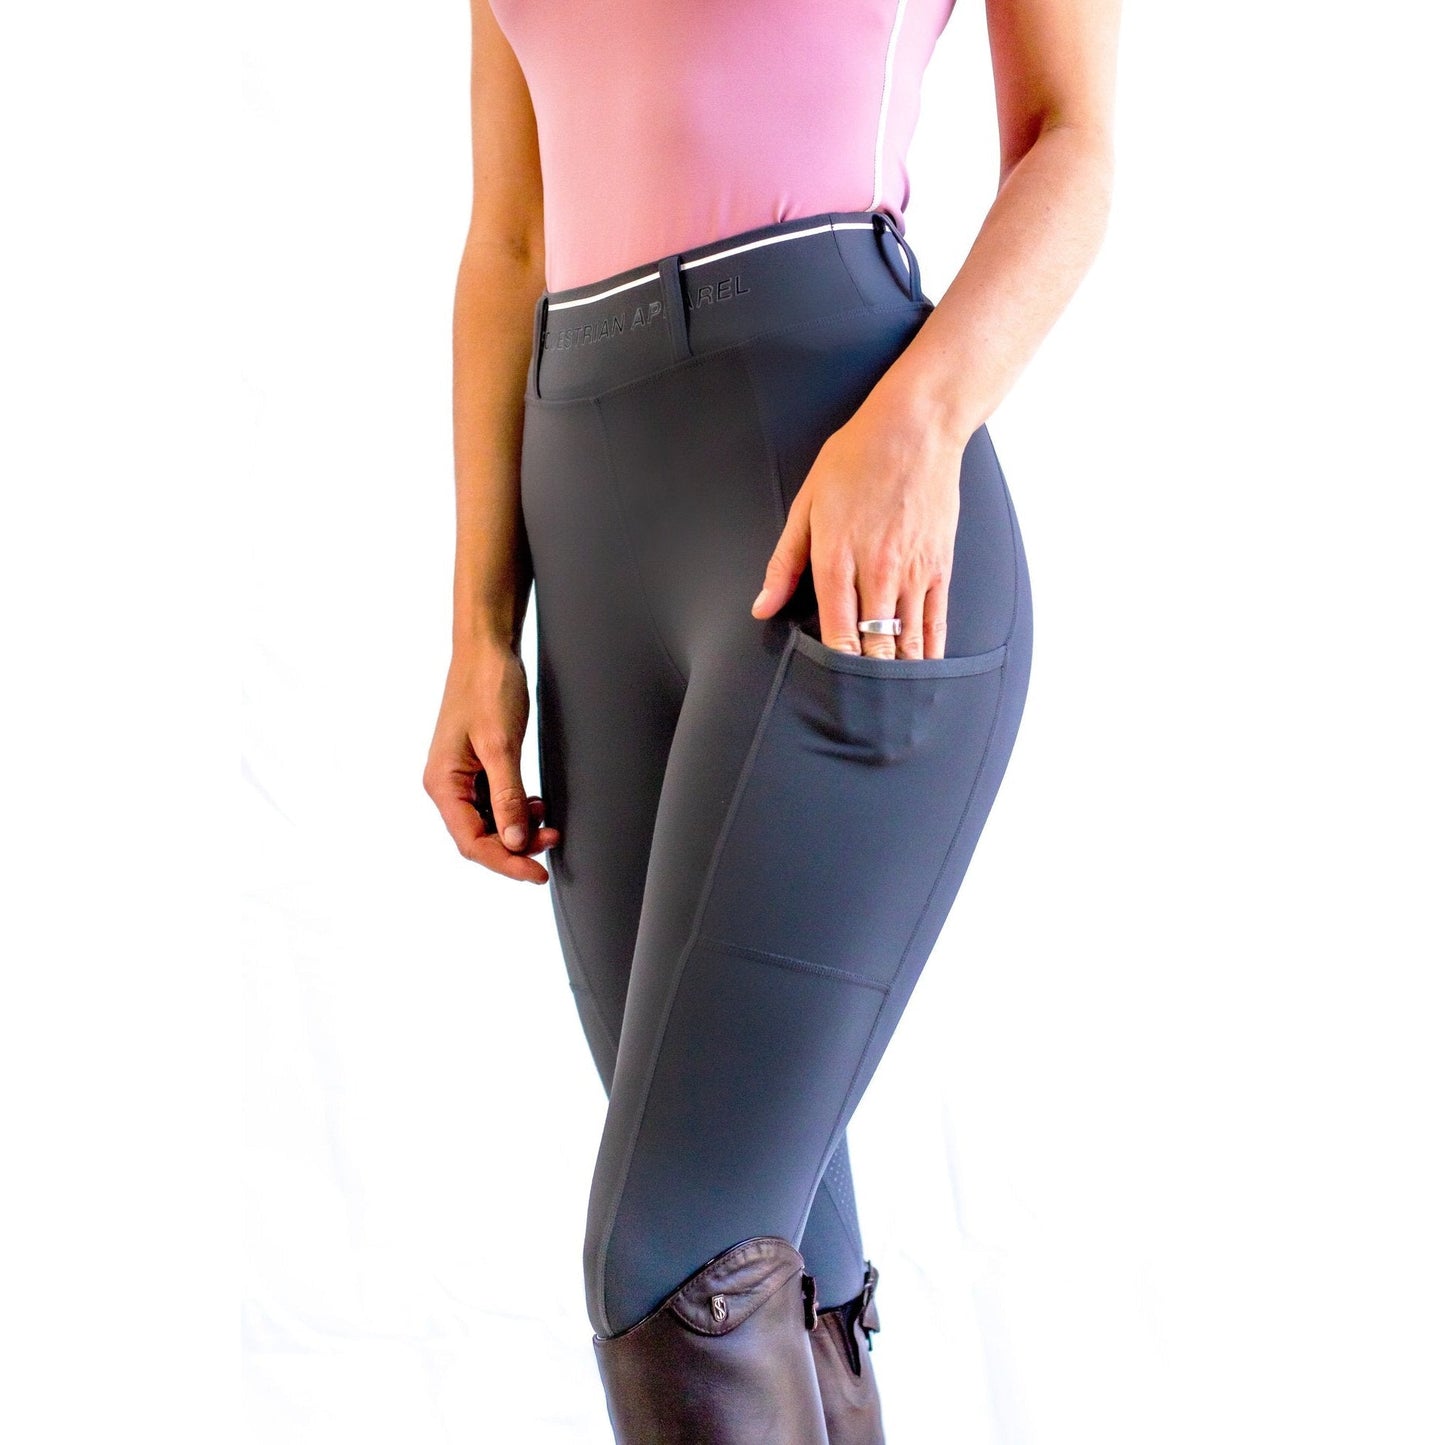 Woman in Horse Riding Tights standing against a white background.